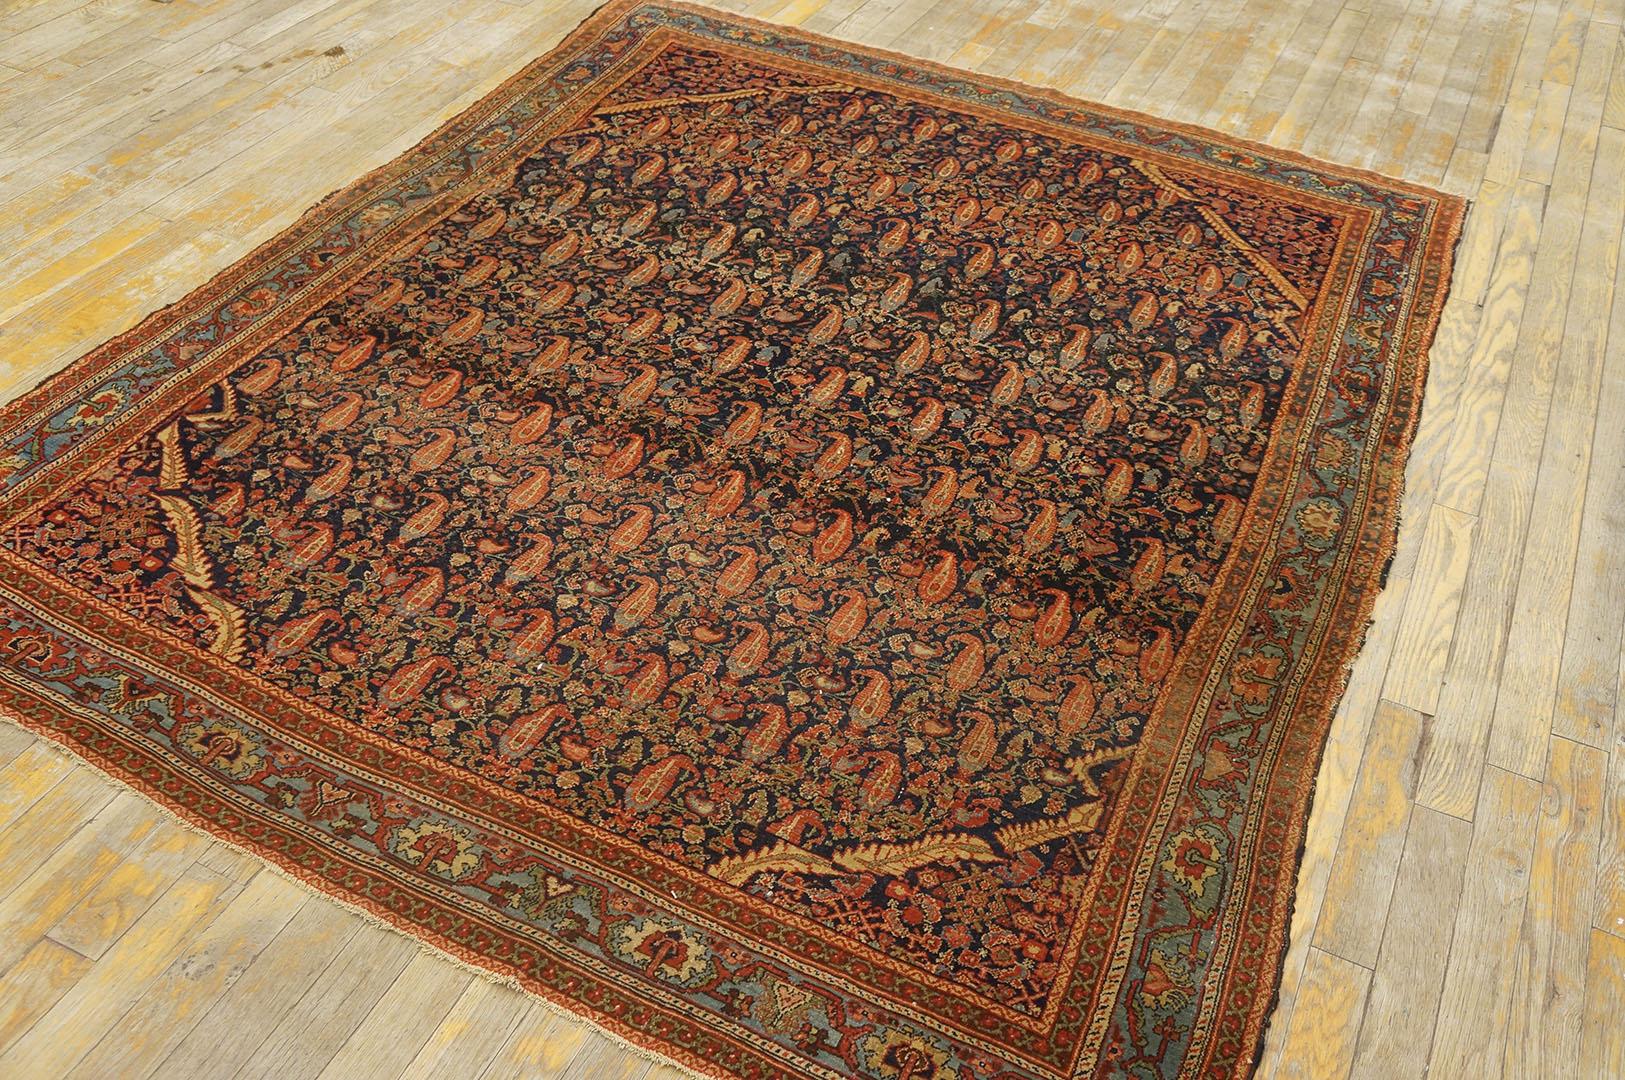 Late 19th Century Persian Malayer Carpet With Paisley Design 
( 5' x 6' 2'' - 152 x 188 cm )